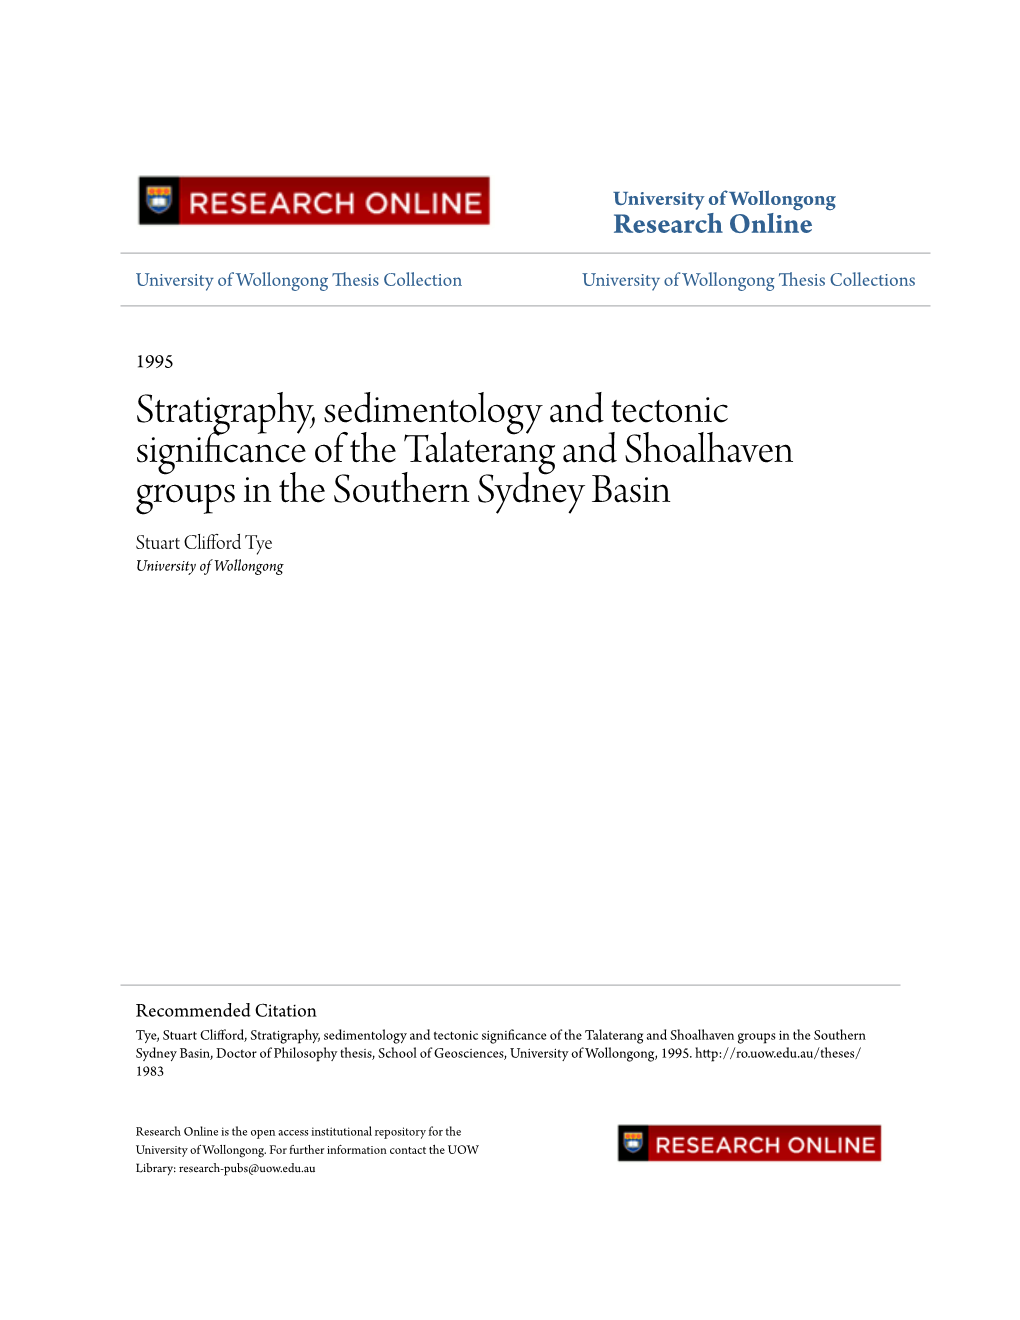 Stratigraphy, Sedimentology and Tectonic Significance of the Talaterang and Shoalhaven Groups in the Southern Sydney Basin